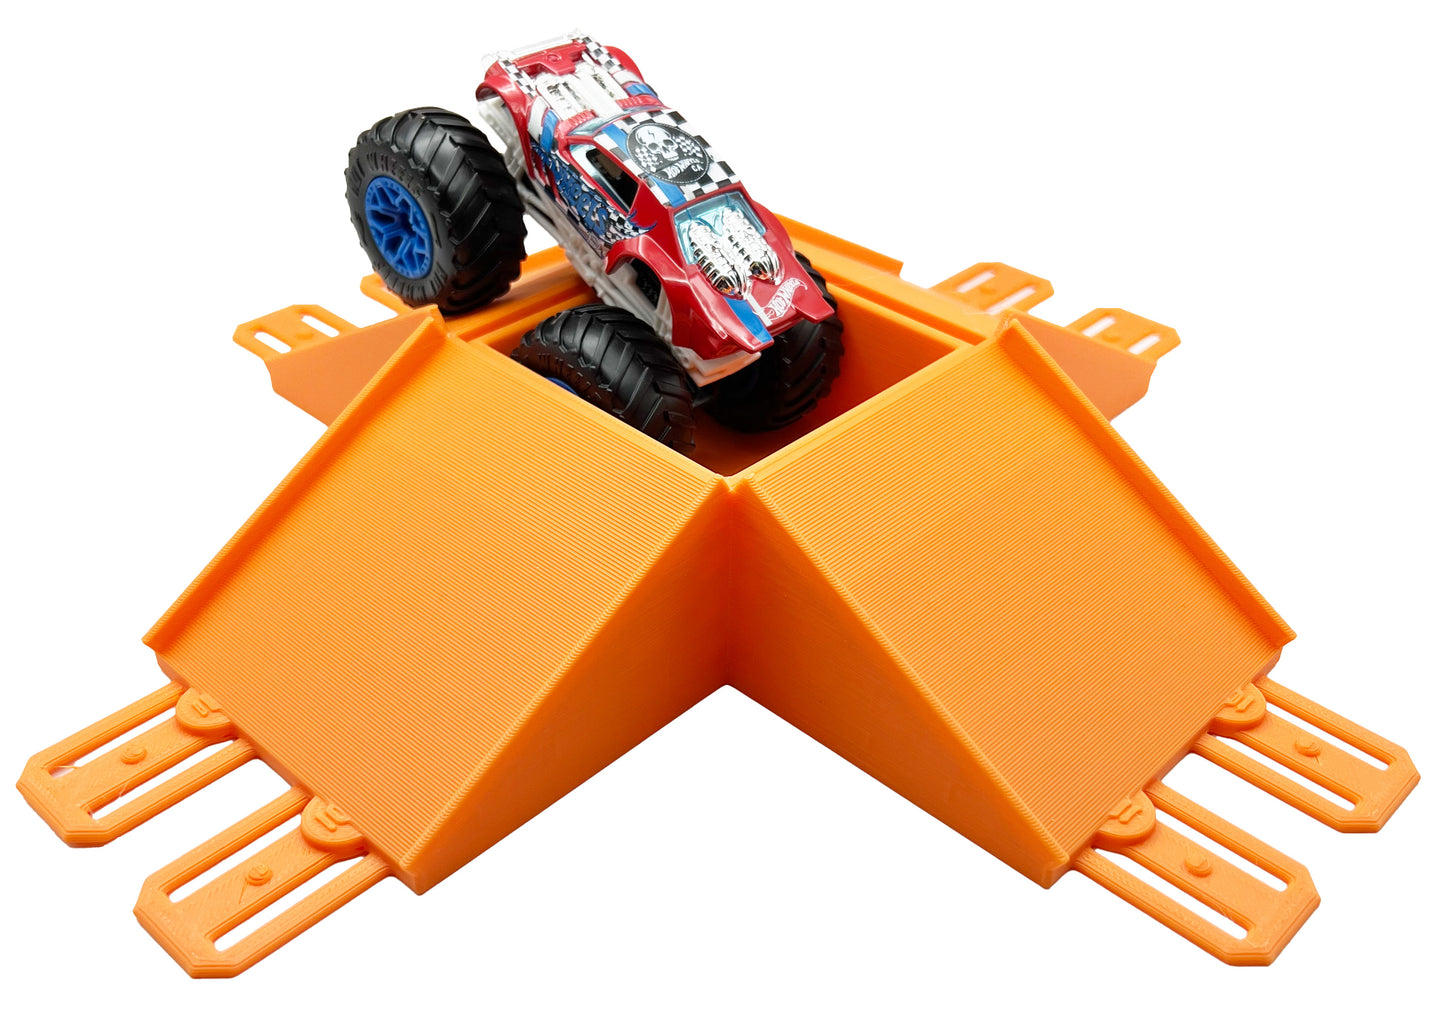 Jeff Did It! - Hot Wheels Monster Truck - 2 Lane 4 Way Jump with The Pit - 3D Printed - Designed and Made in the USA